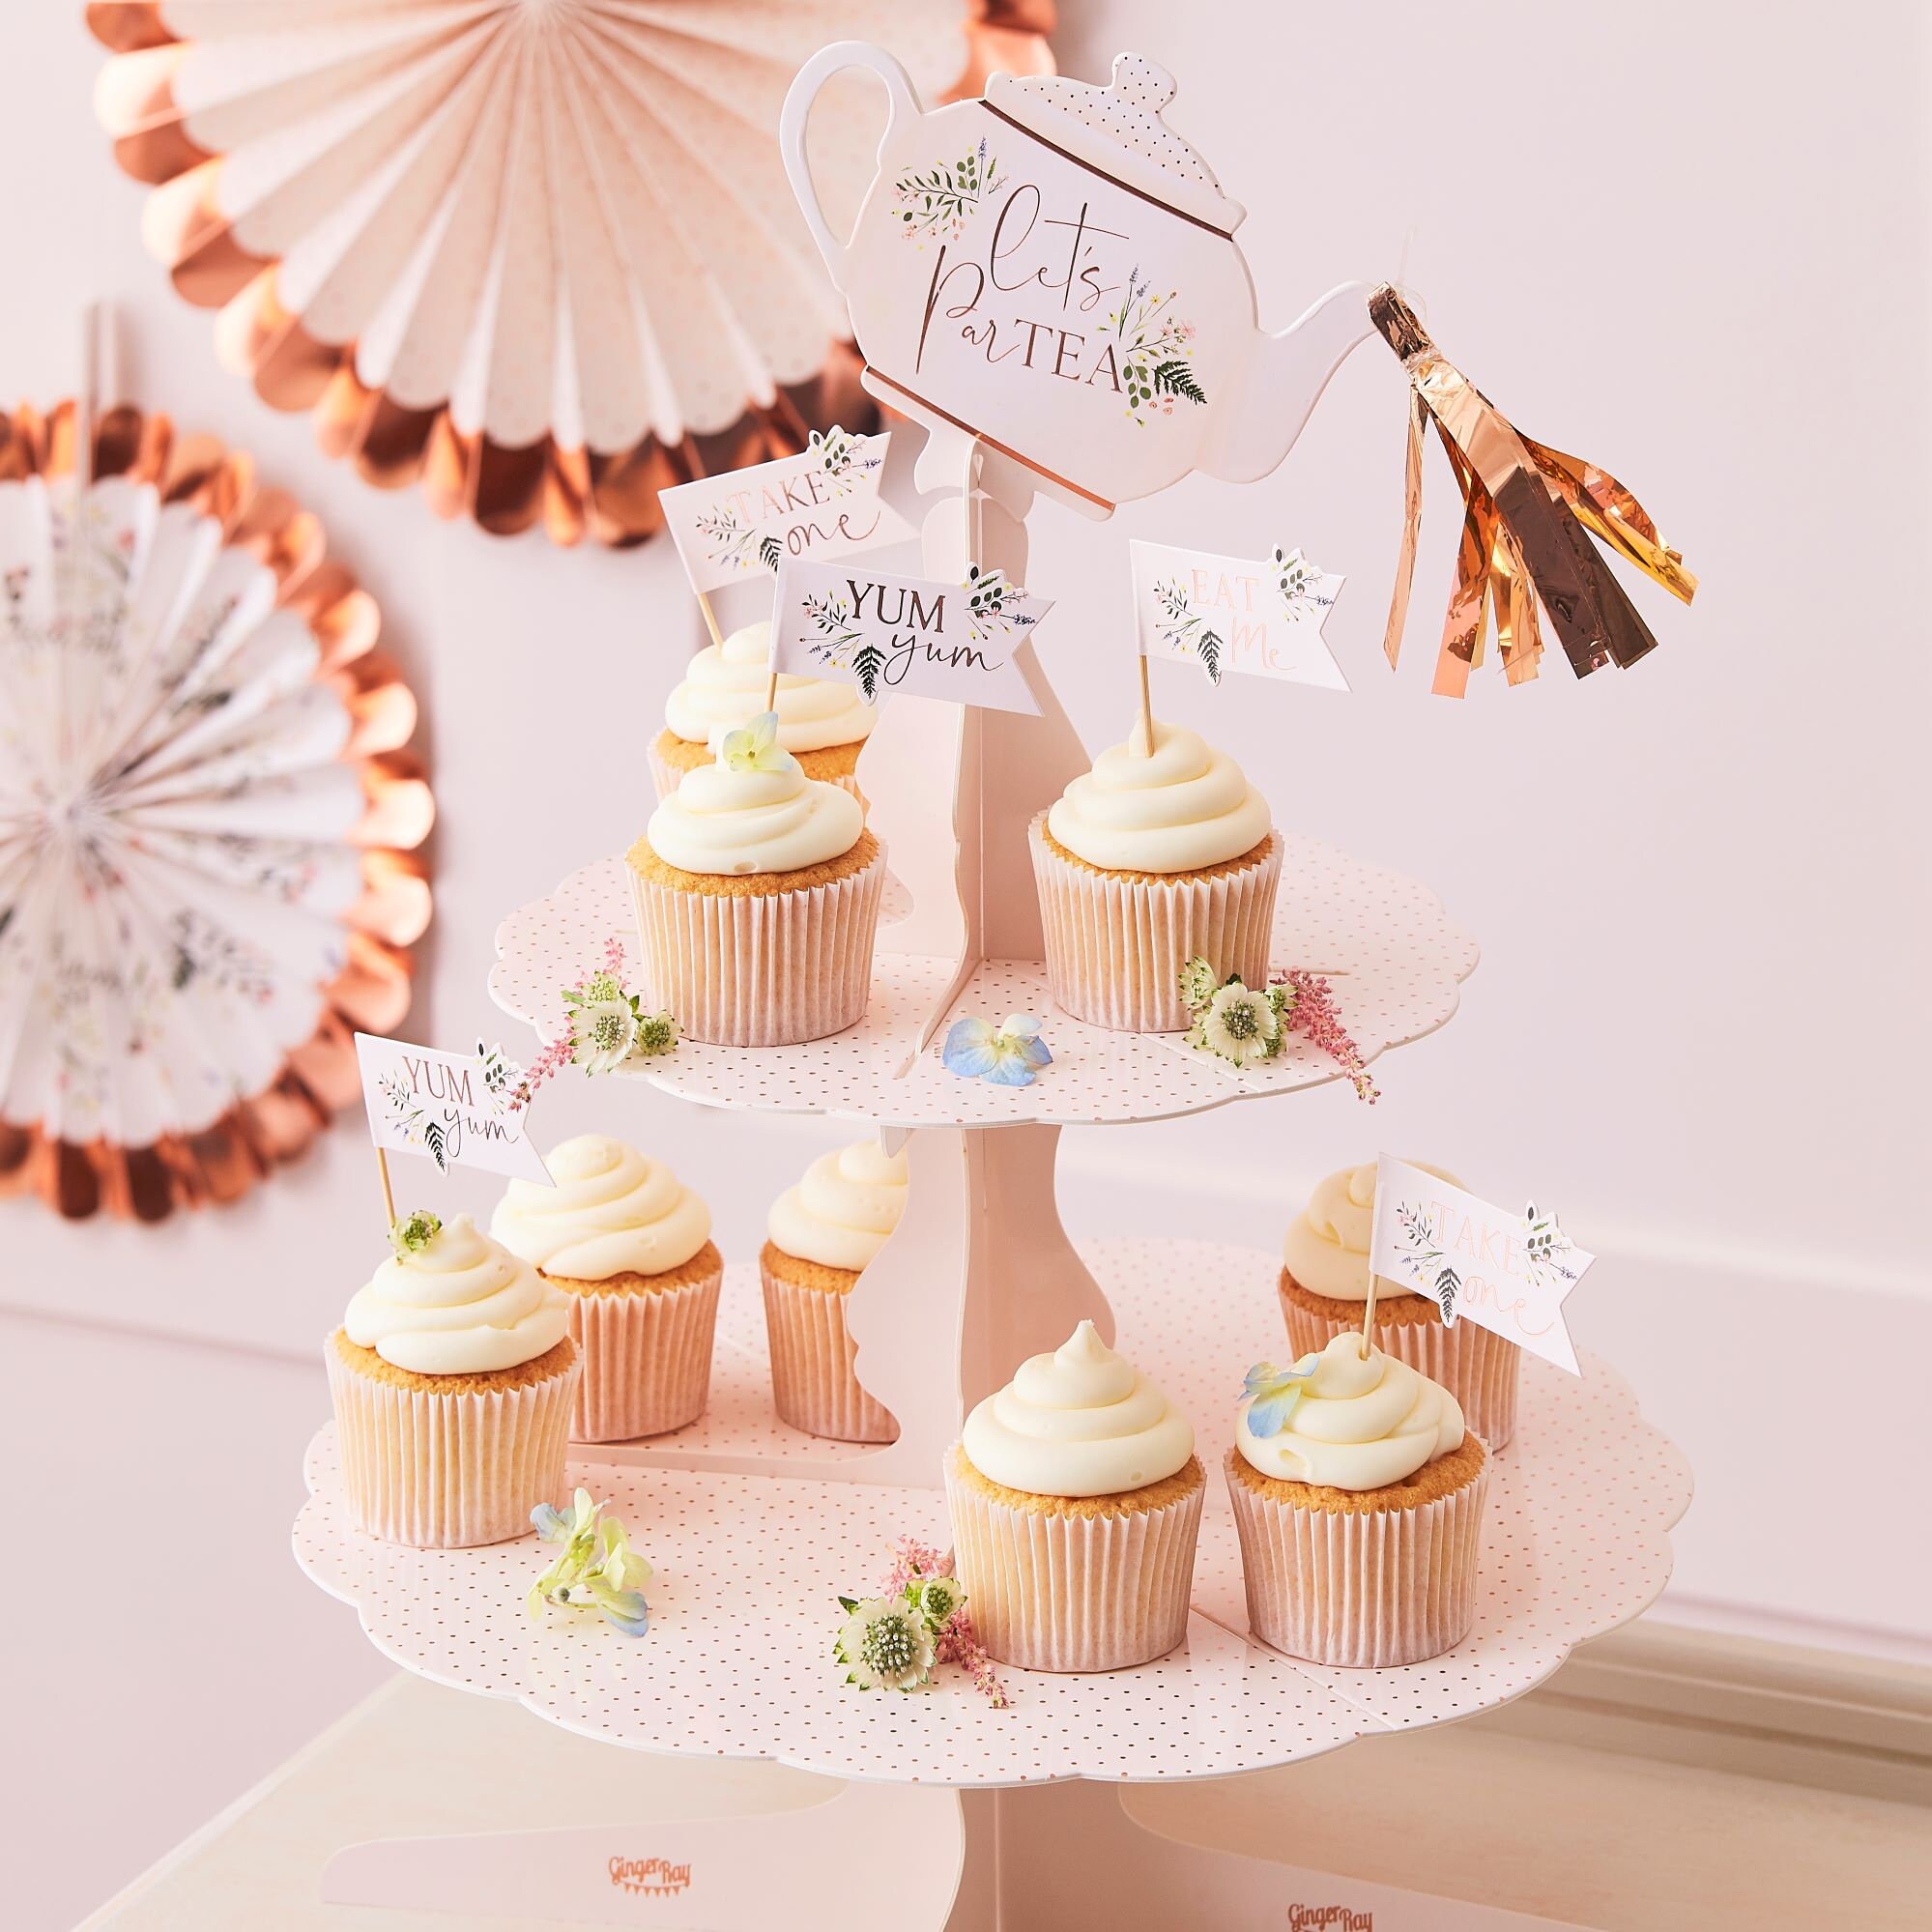 Stores Flat 2 or 3 Tier Cake Display Stand with Three Fun Sign Options 2-in-1 Decorative Cake and Cupcake Stand by Sweet Tooth Fairy 